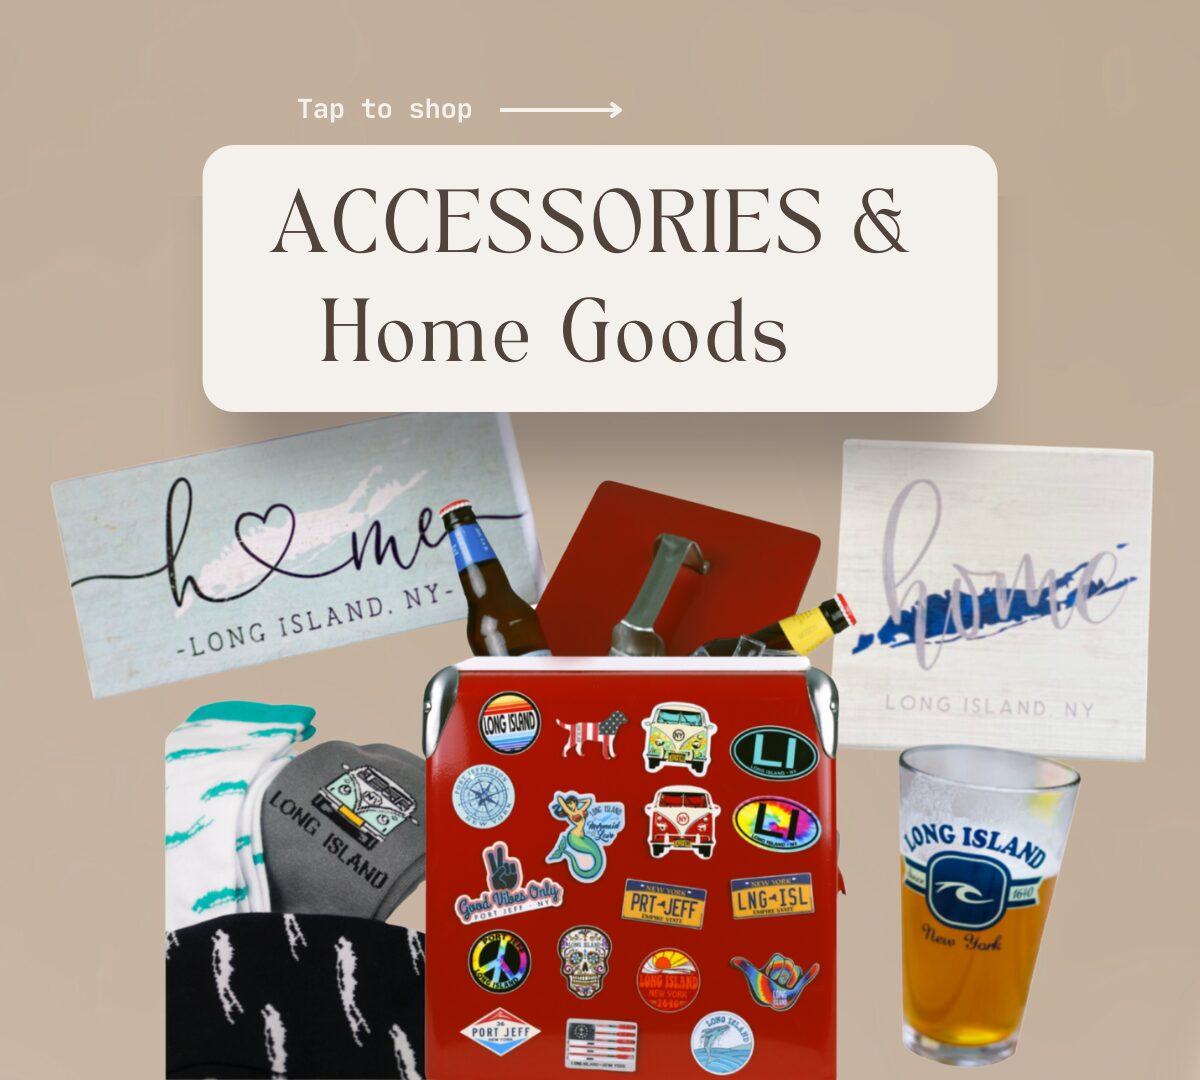 tap to shop. accessories and home goods